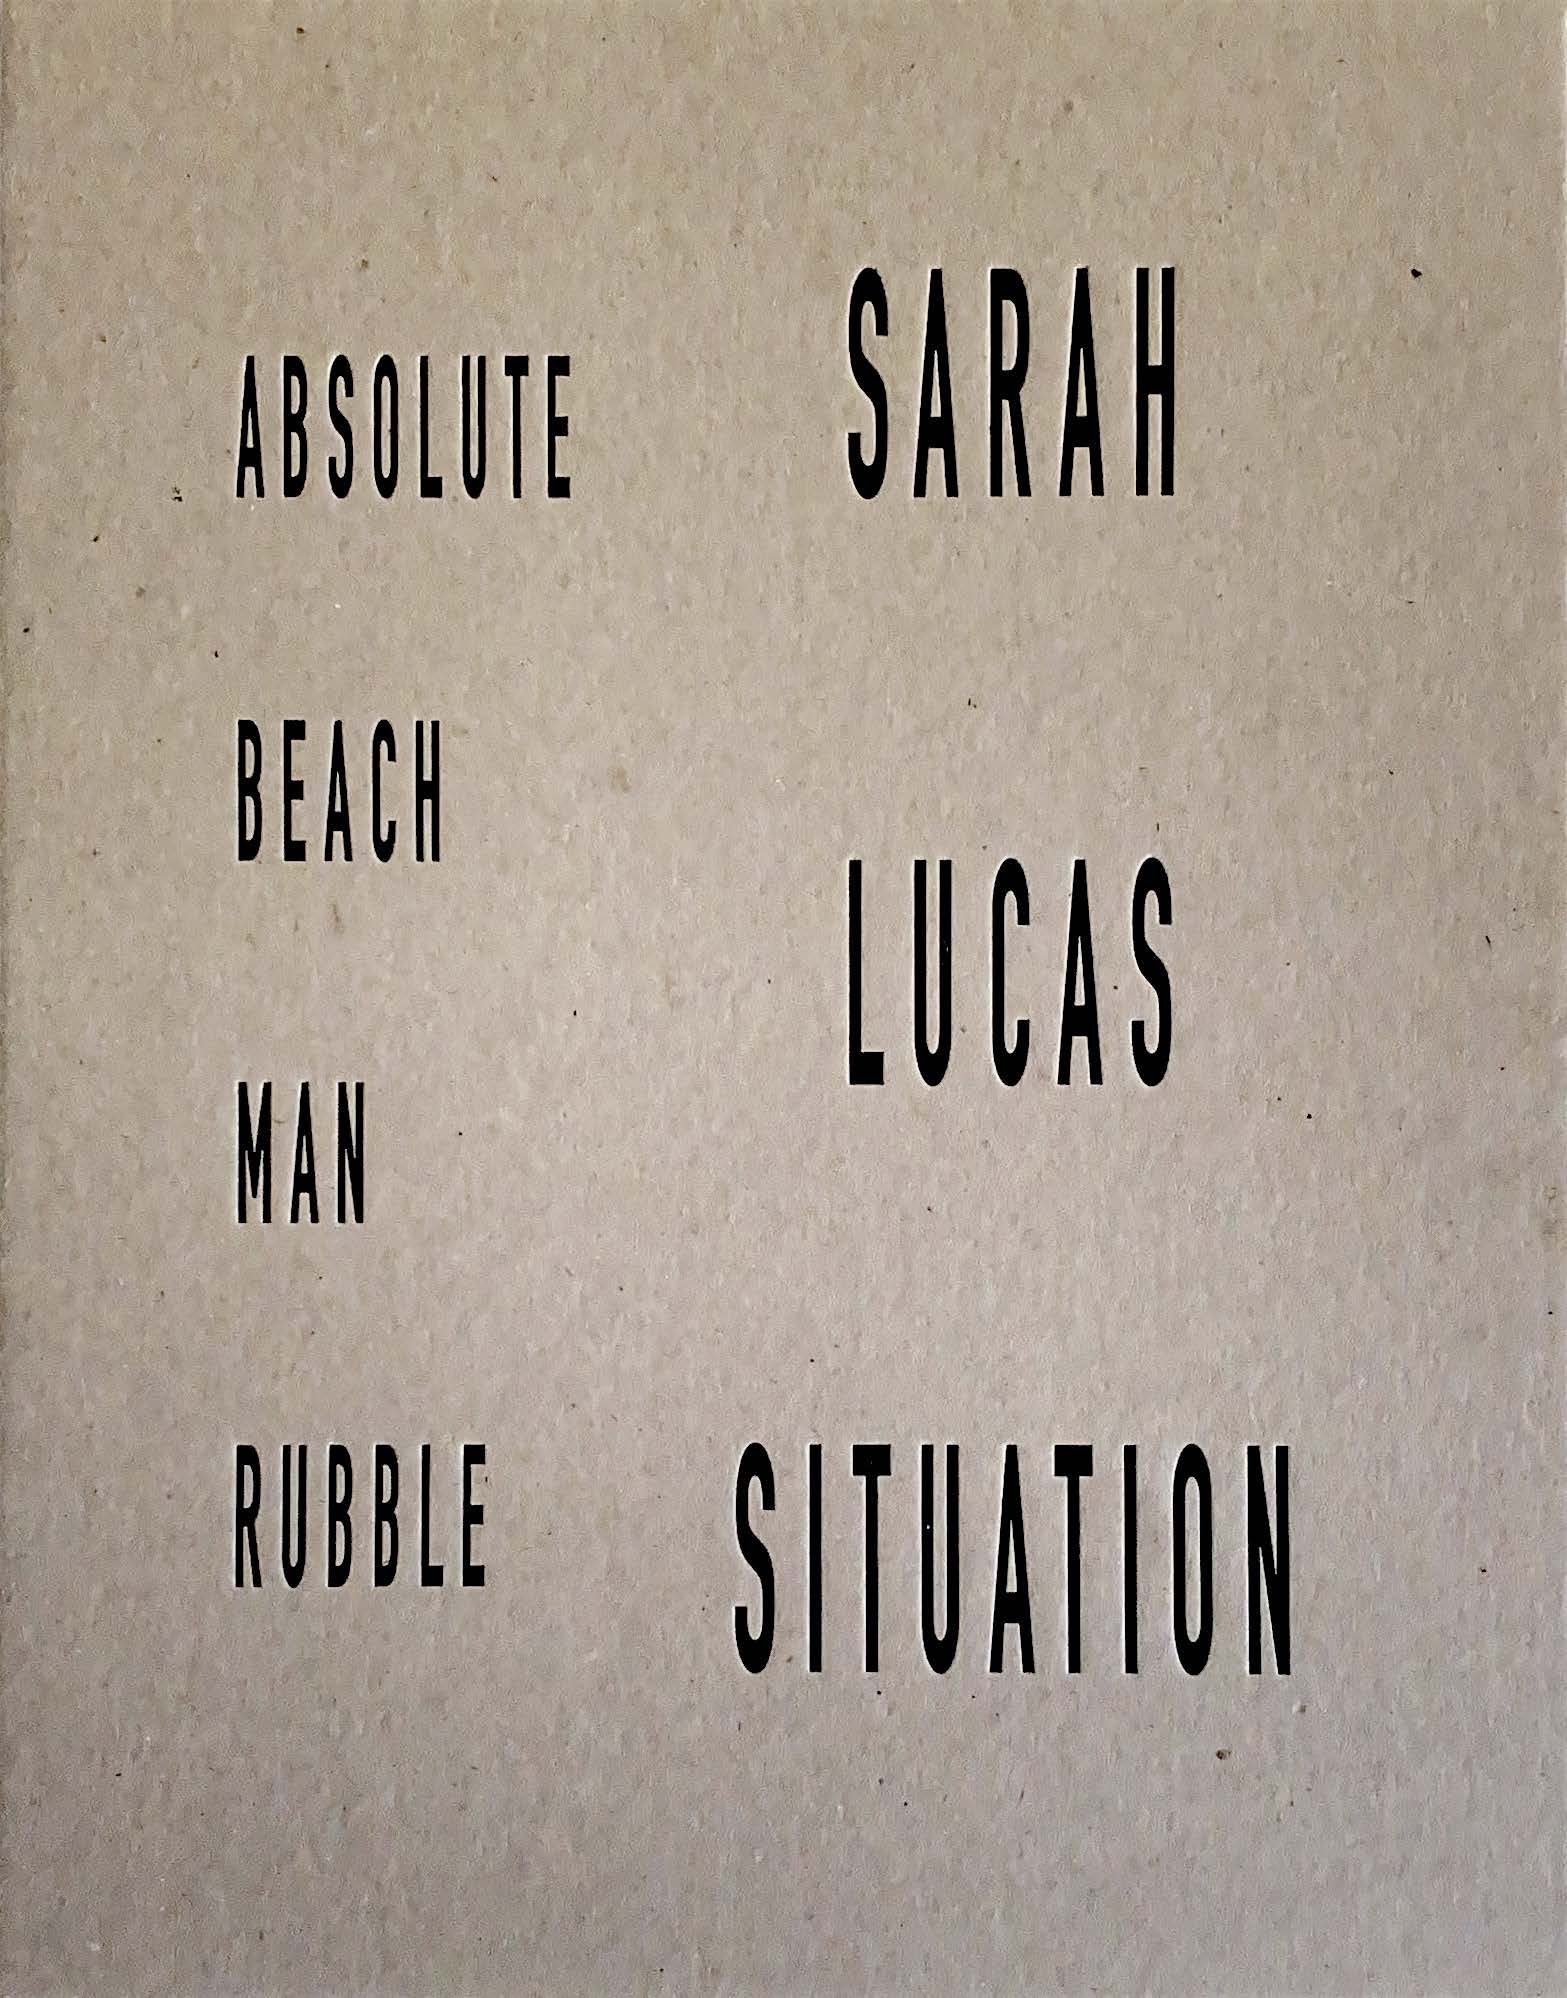 Situation: Absolute Beach Man Rubble
Signed copy. N° 70/100